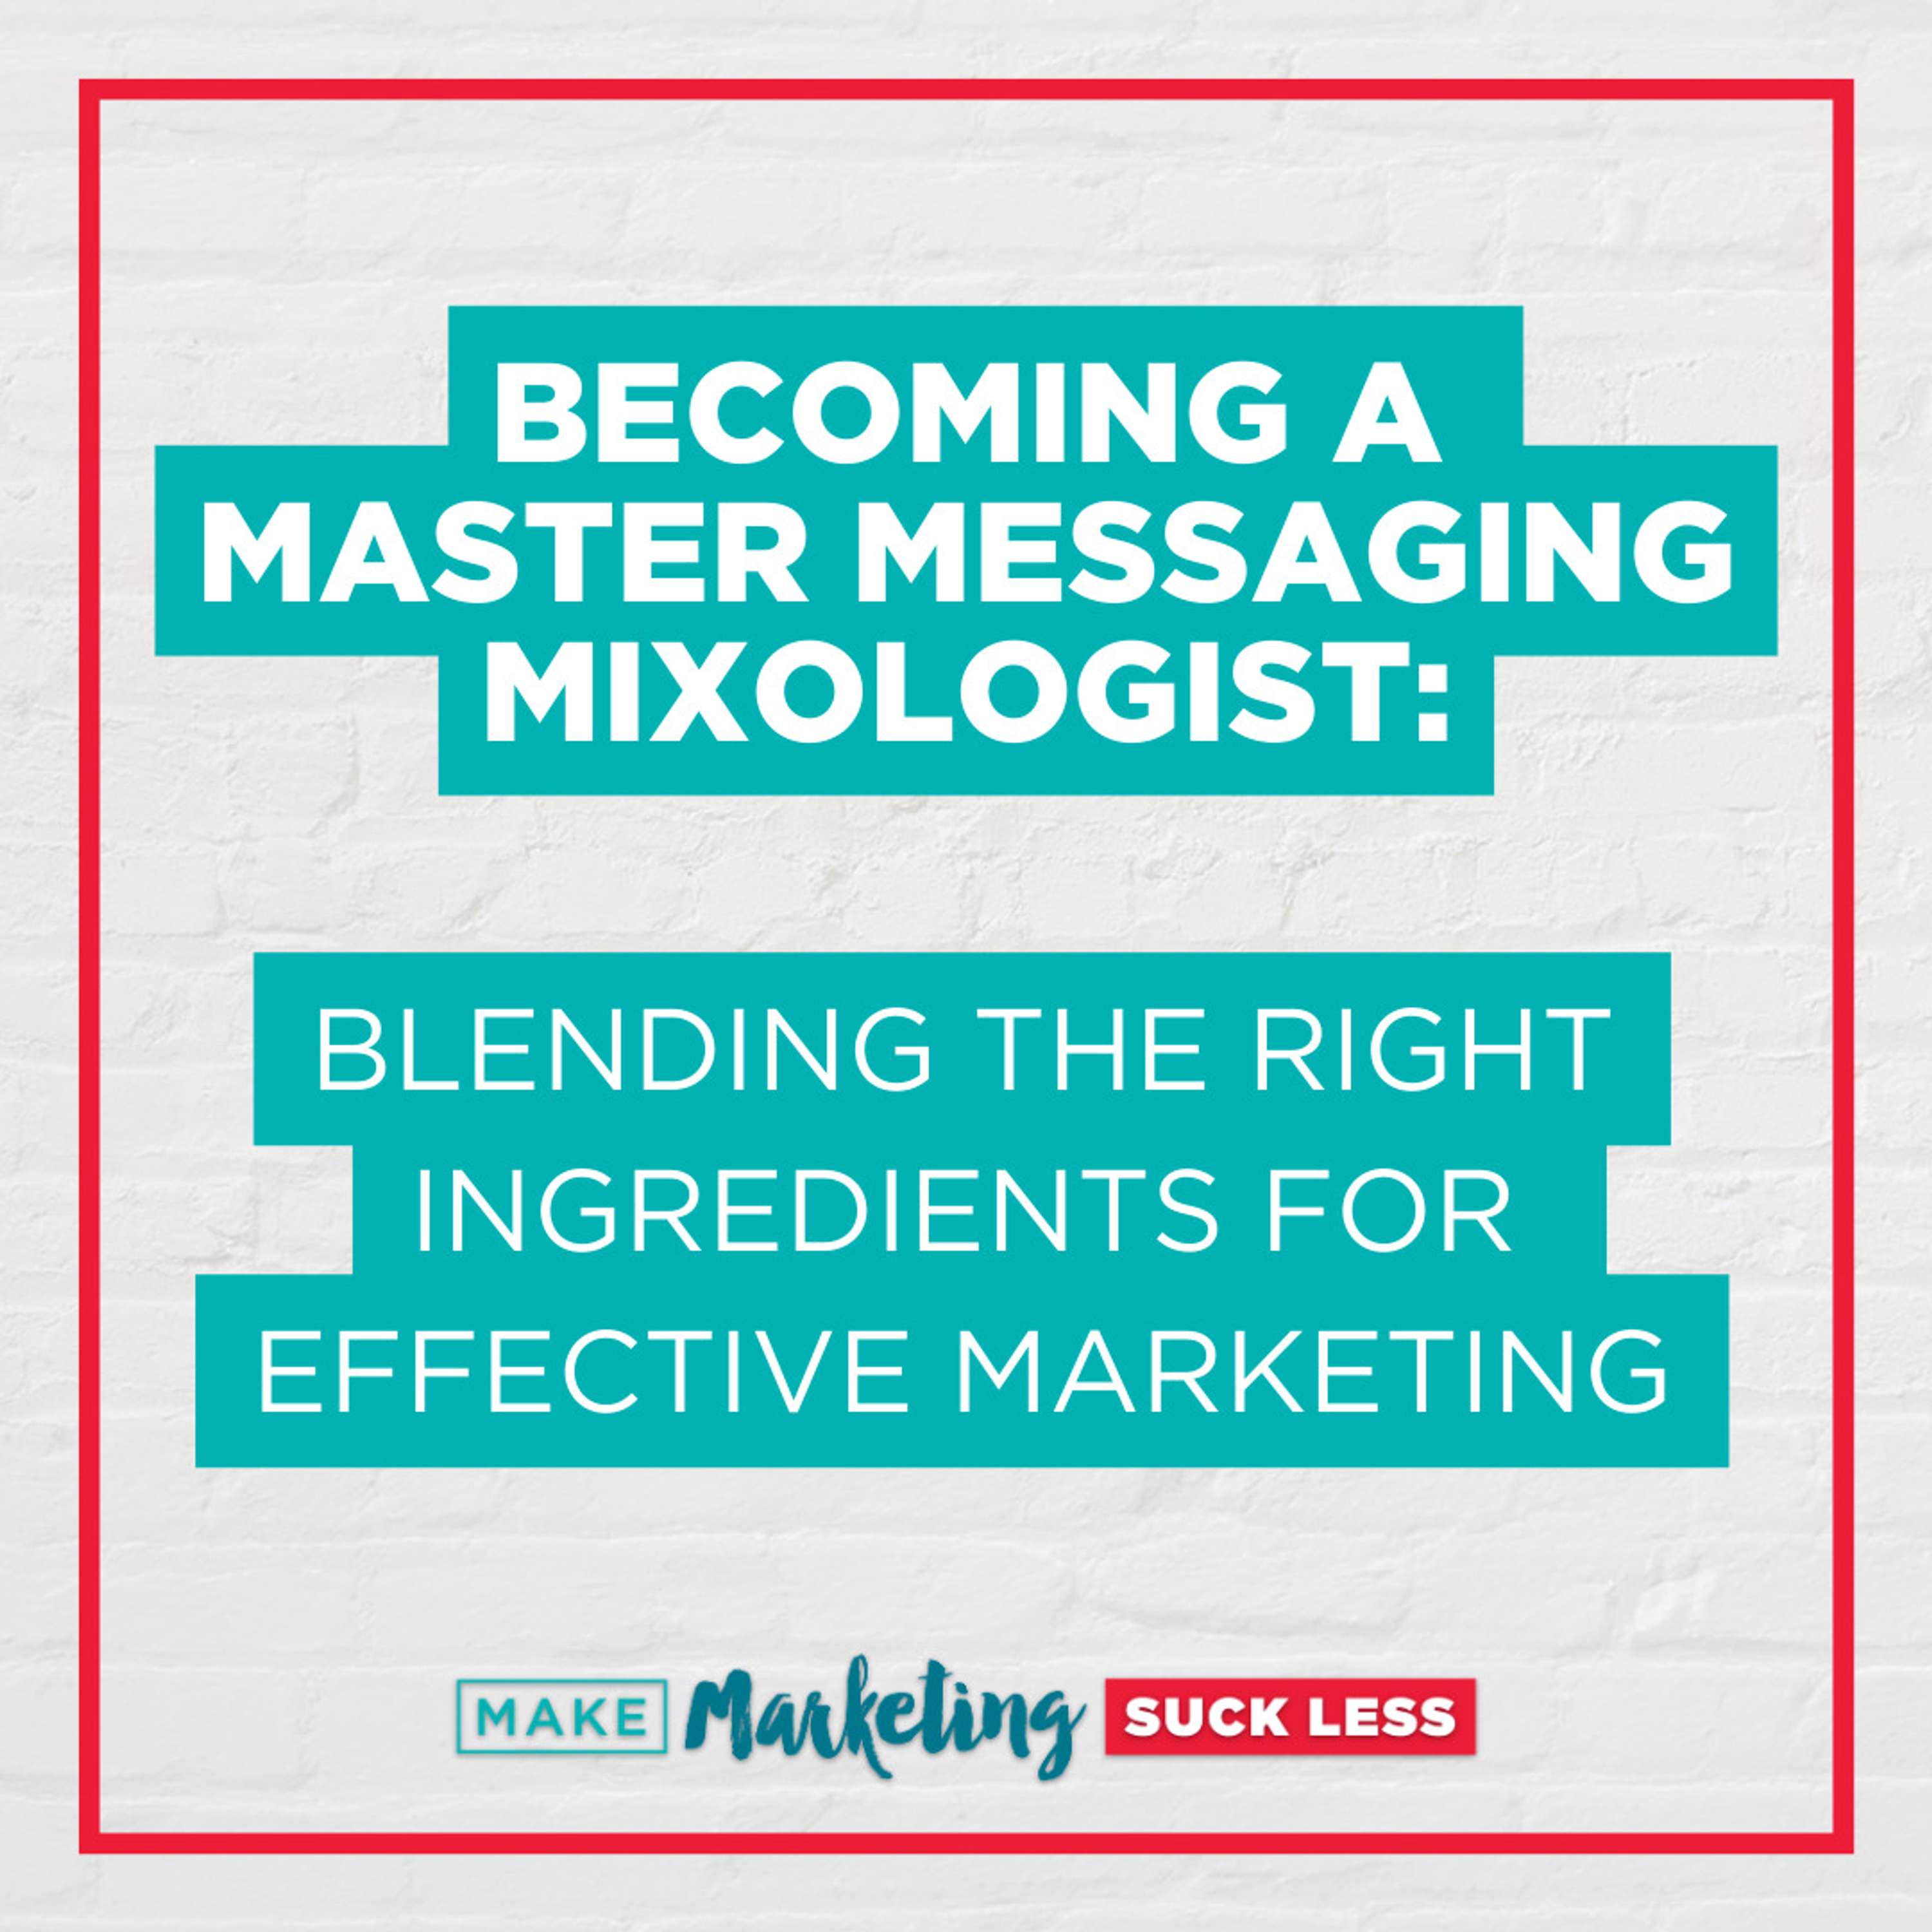 Becoming a Master Messaging Mixologist: Blending the Right Ingredients for Effective Marketing